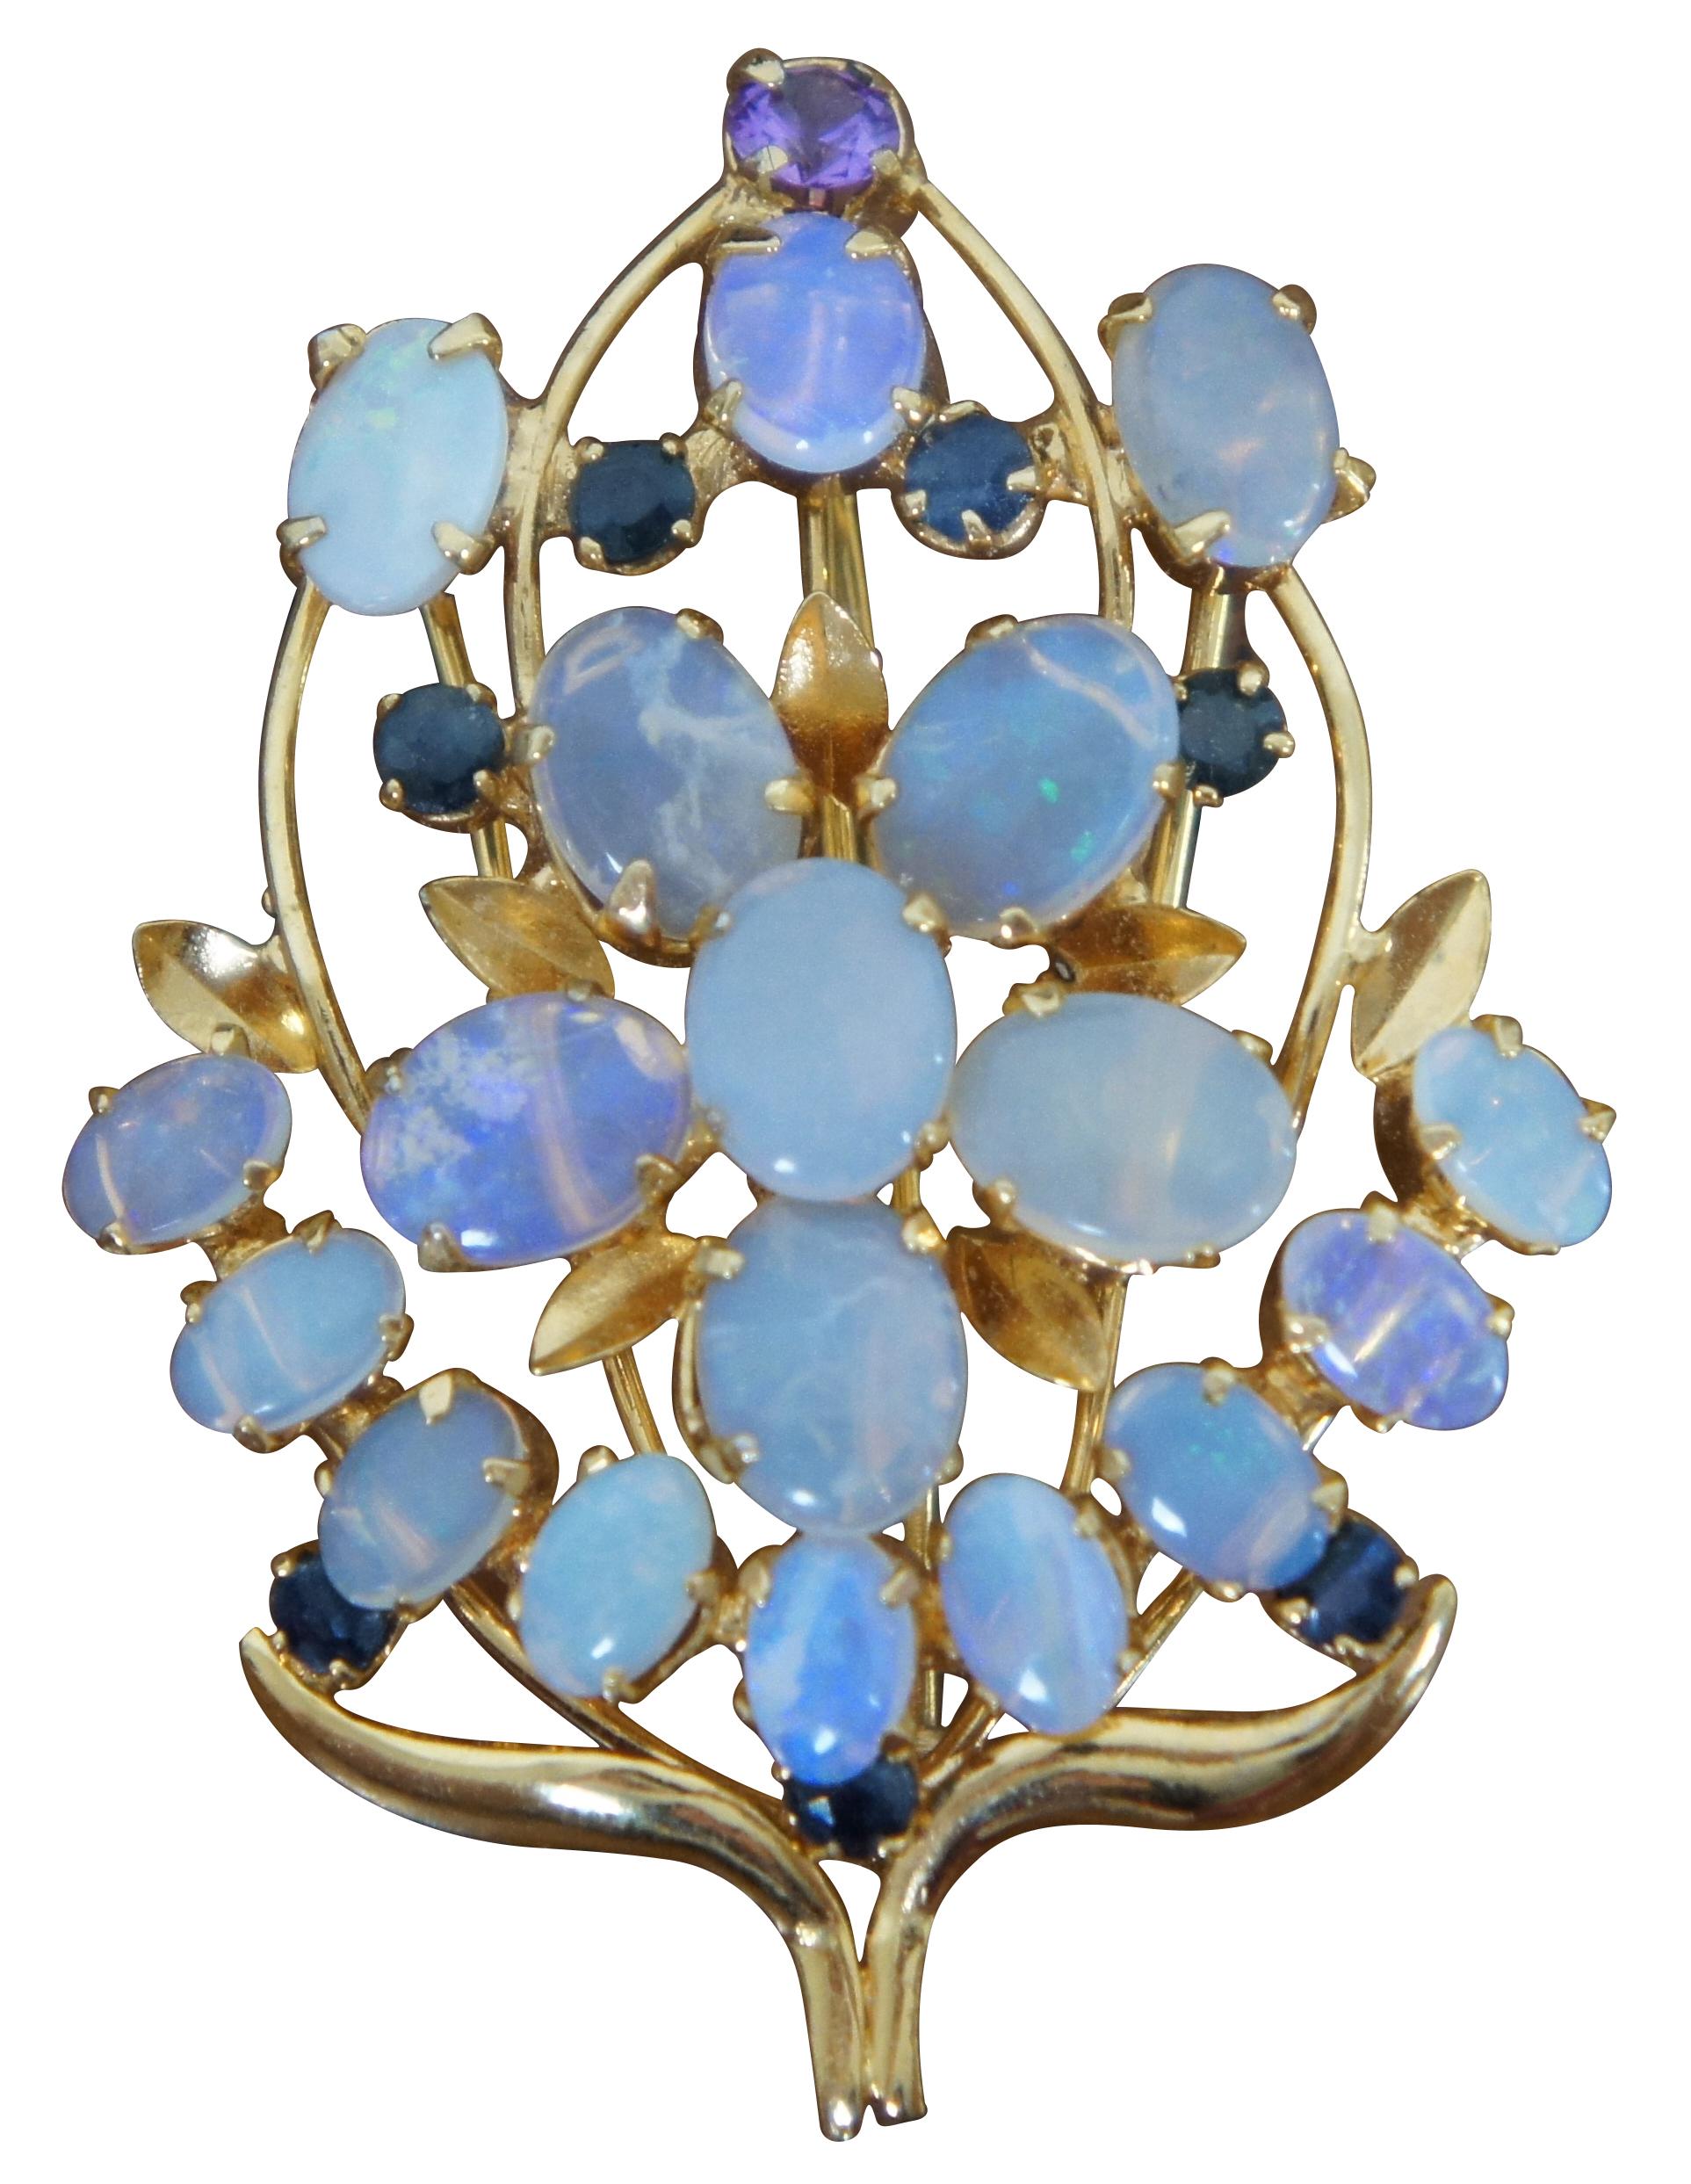 Pair of pins / brooches / pendants circa mid-20th century, featuring opals and sapphires in the shape of a flower bouquet.